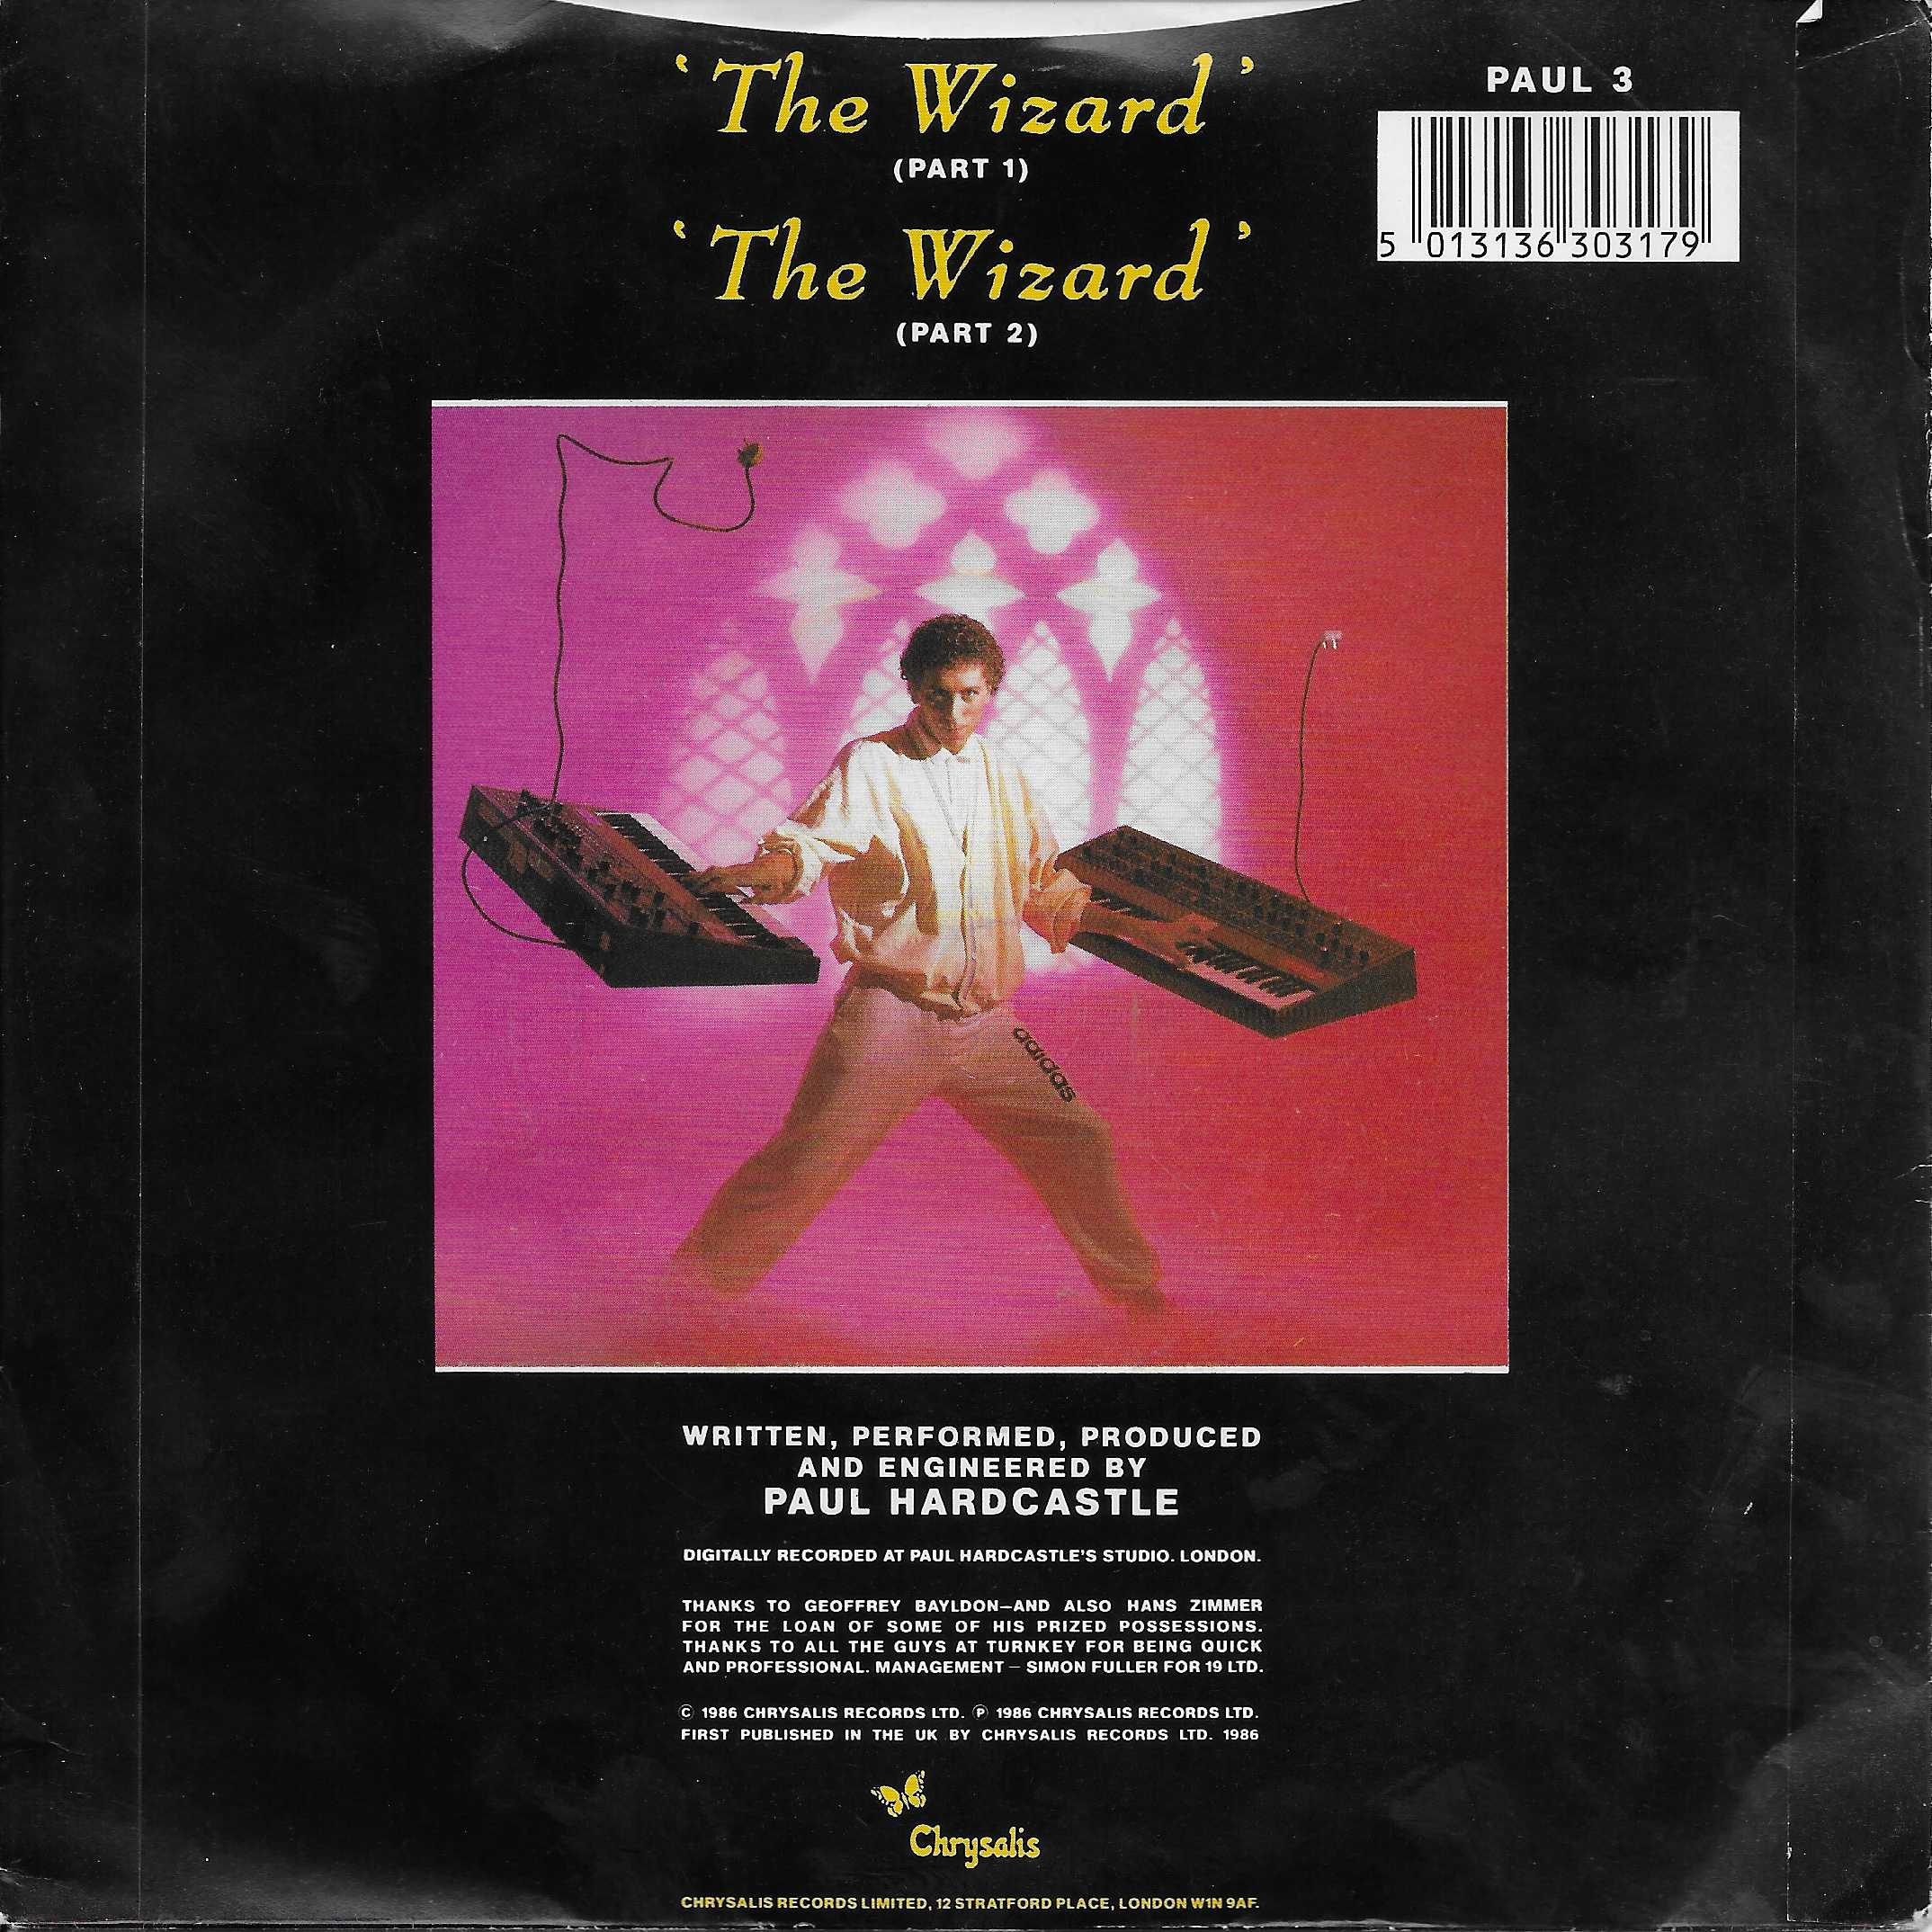 Picture of PAUL 3 The wizard part 1 (Top of the pops) by artist Paul Hardcastle from the BBC records and Tapes library